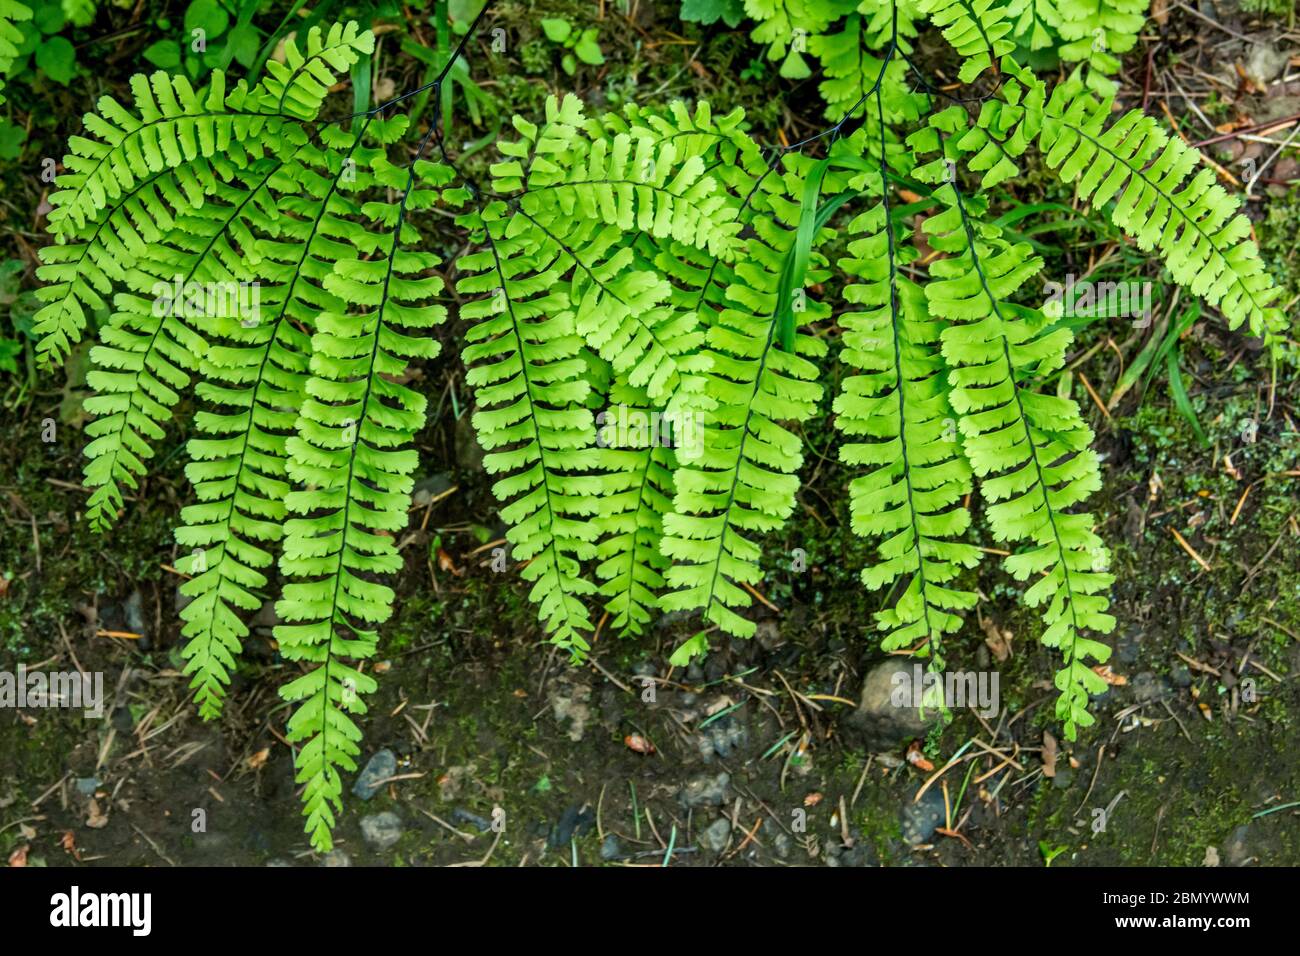 Maidenhair Ferns growing on Horsetail Falls Trail which is located 2.75 miles east of Multnomah Falls on the Historic Columbia River Highway in Oregon Stock Photo